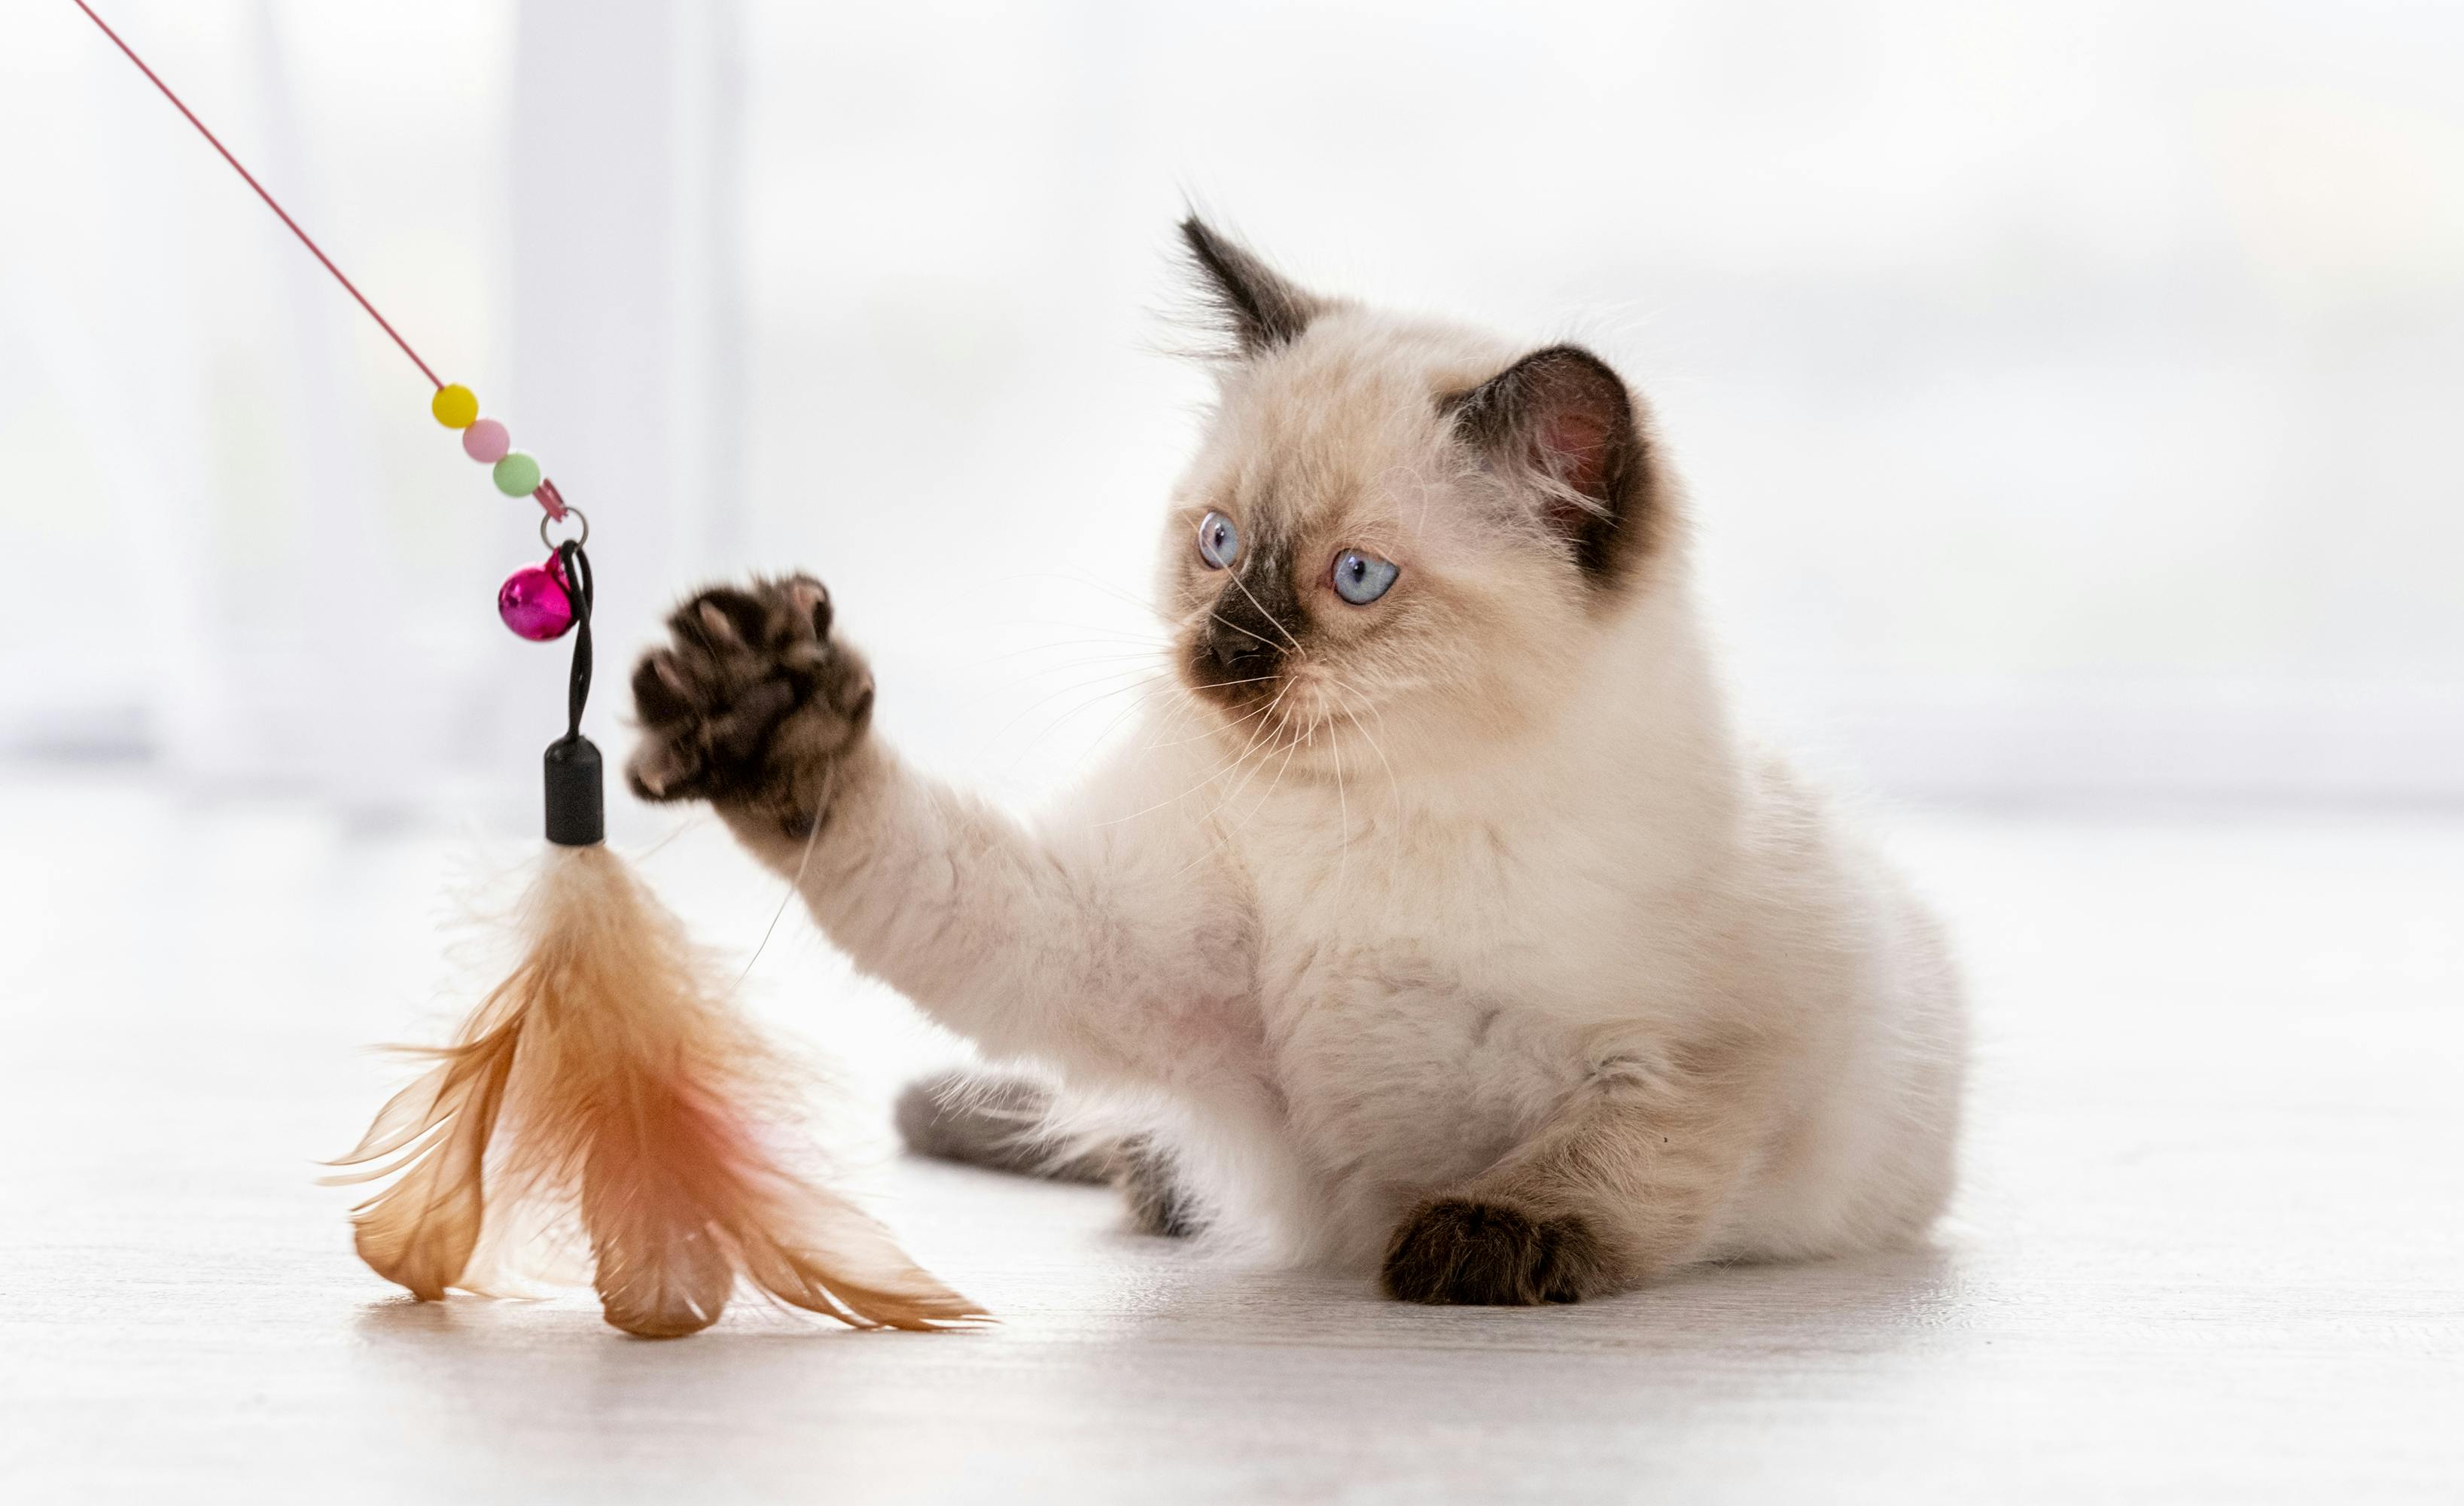 Interactive cat toy, Programmable game for cats